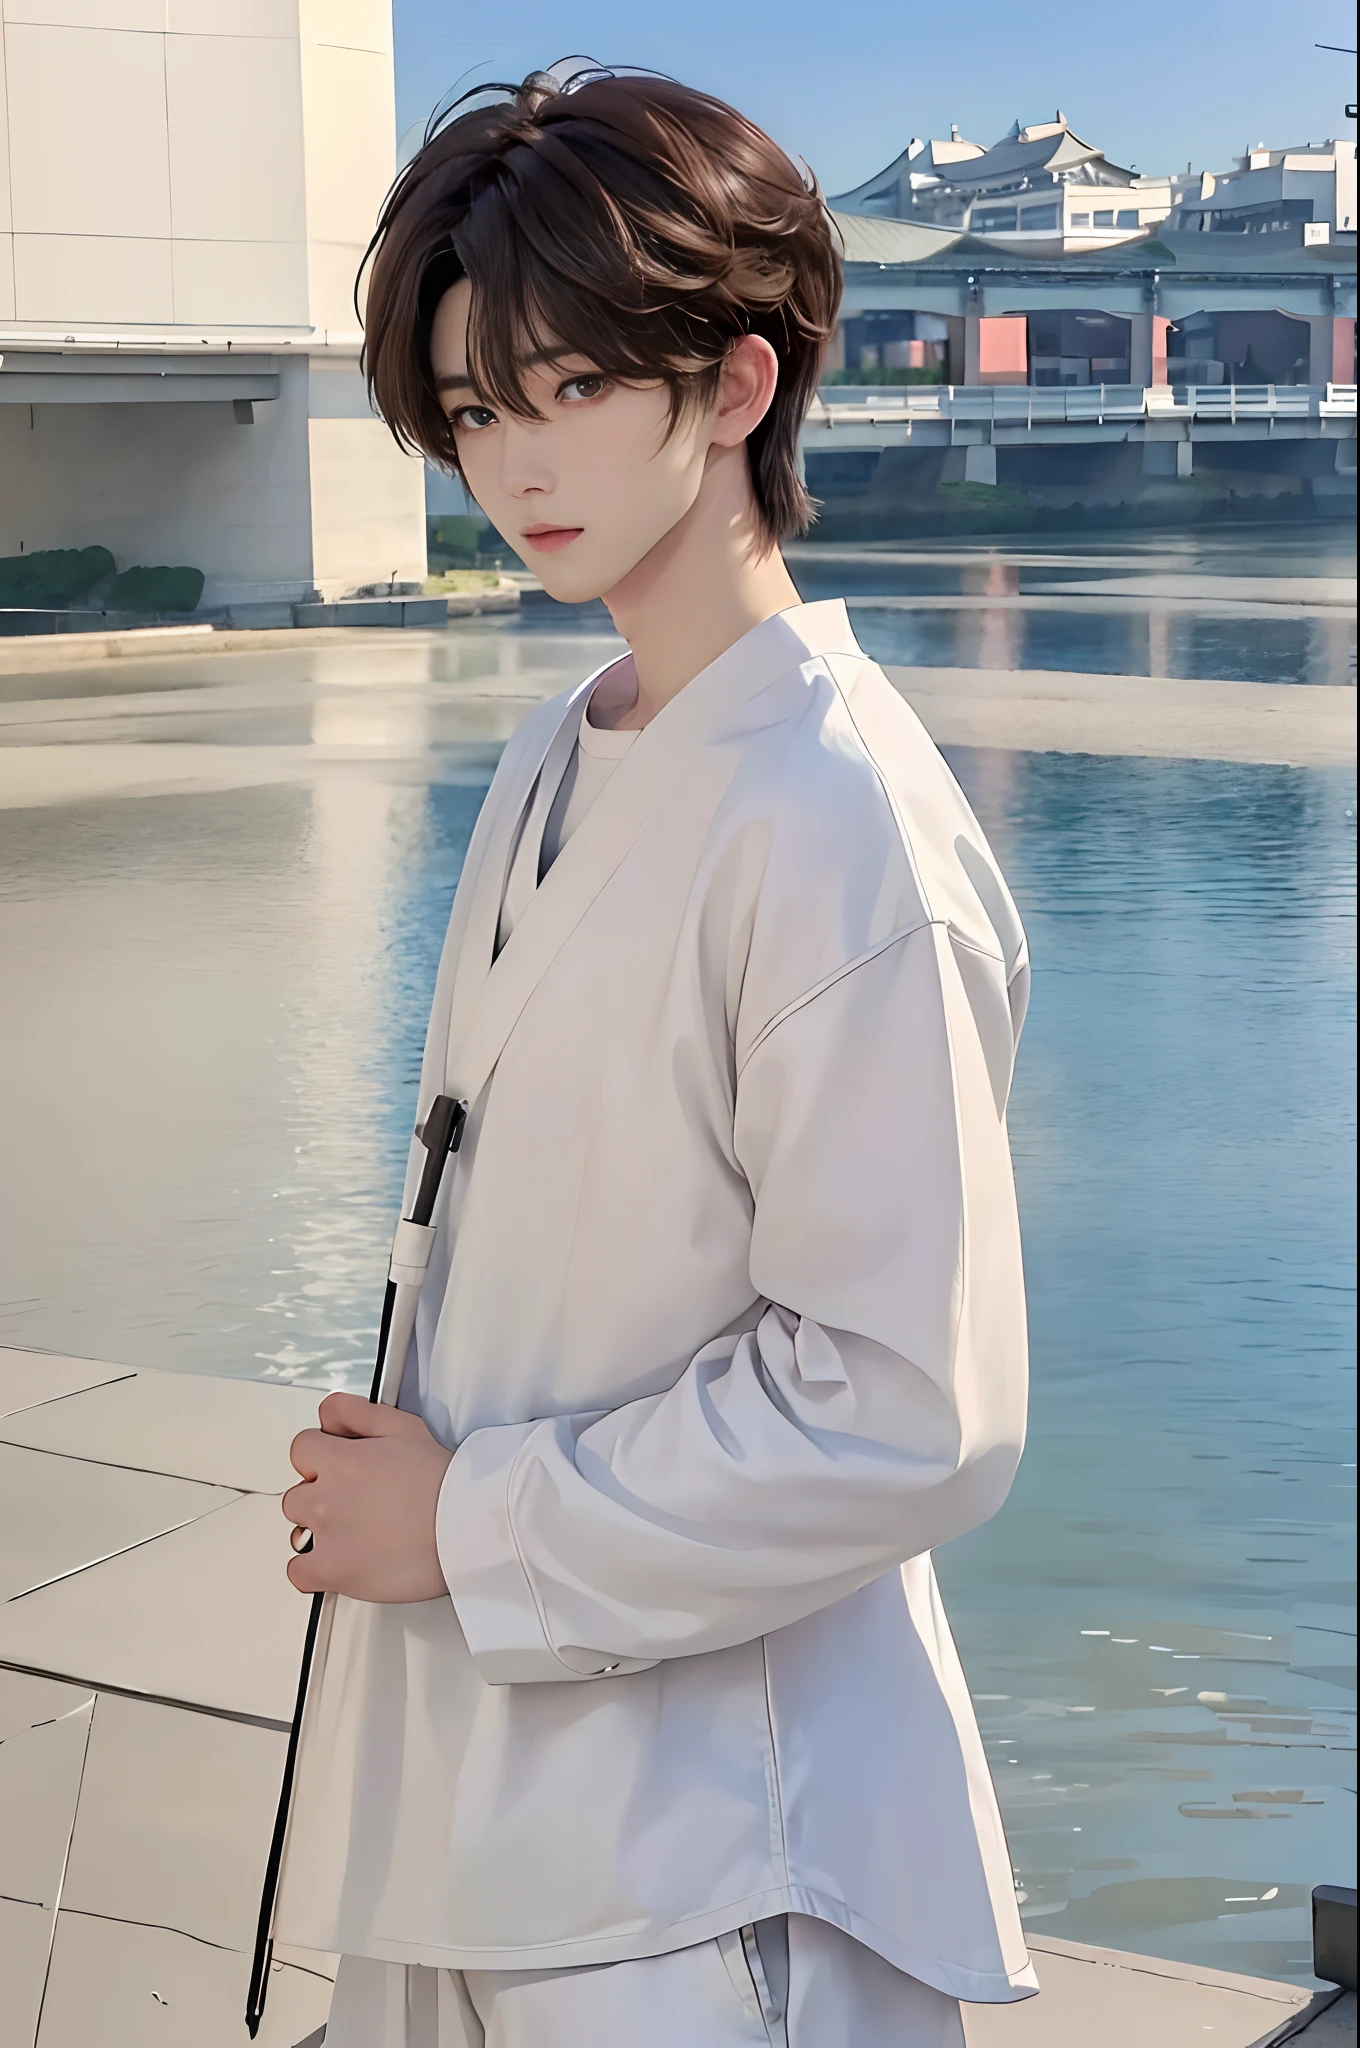 masterpiece、top-quality)、One Manly Boy、Slim body、((Black and white casual  clothes:1.1))、(Detailed beautiful eyes)、In the Han River、Face similar to  Chaewon in Le Selefim、((short hair above the ears))、((Smaller  face))、((Neutral face))、((Light ...